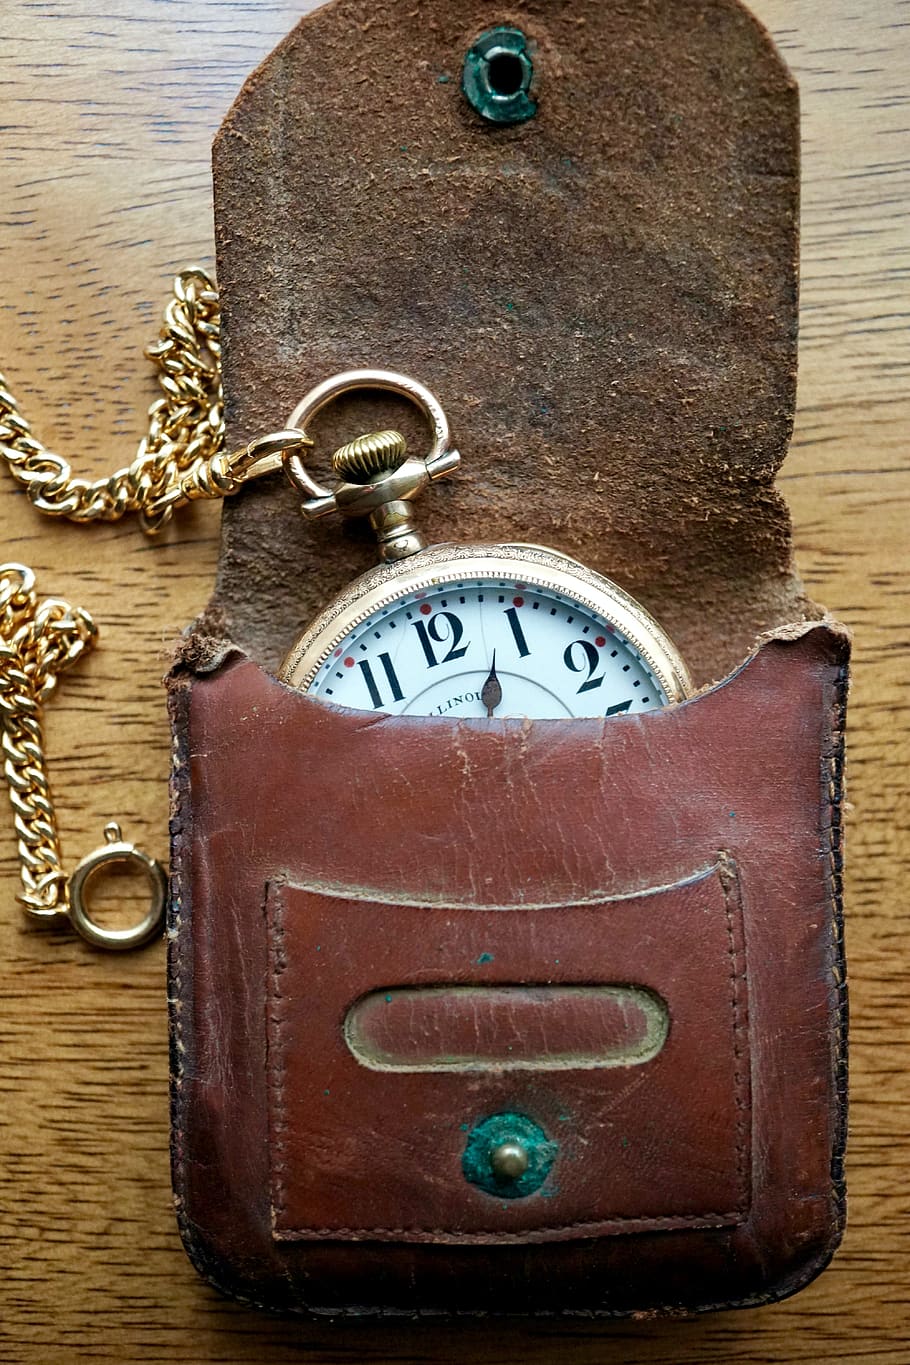 pocketwatch, antique, vintage, old, timepiece, time, close-up, clock, instrument of time, still life